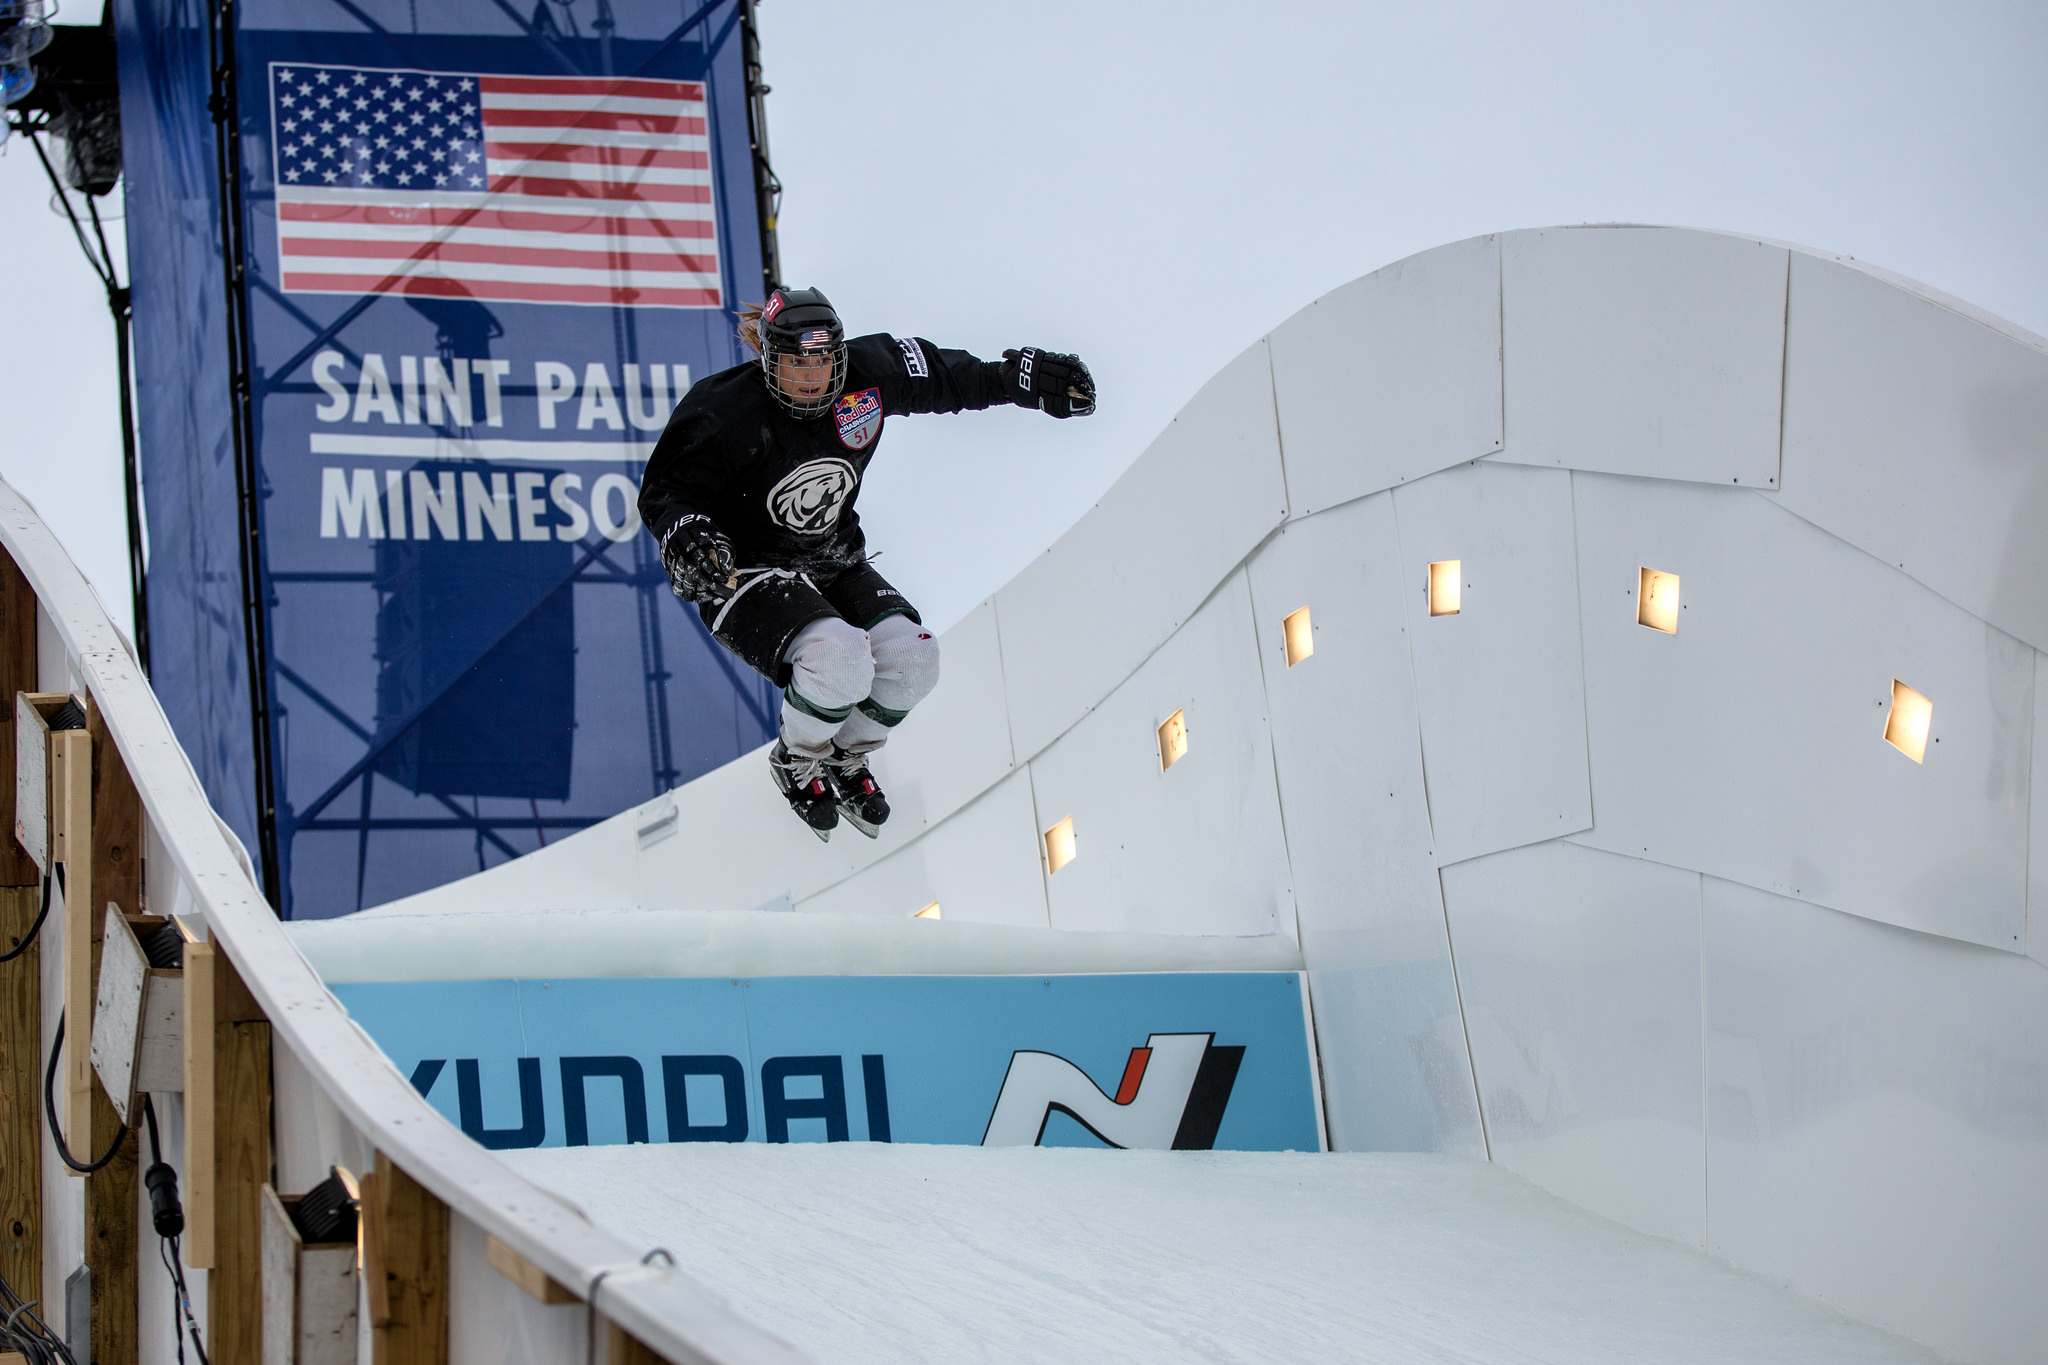 red bull crashed ice 20183 Red Bull Crashed Ice 2018 in St Paul, Minnesota